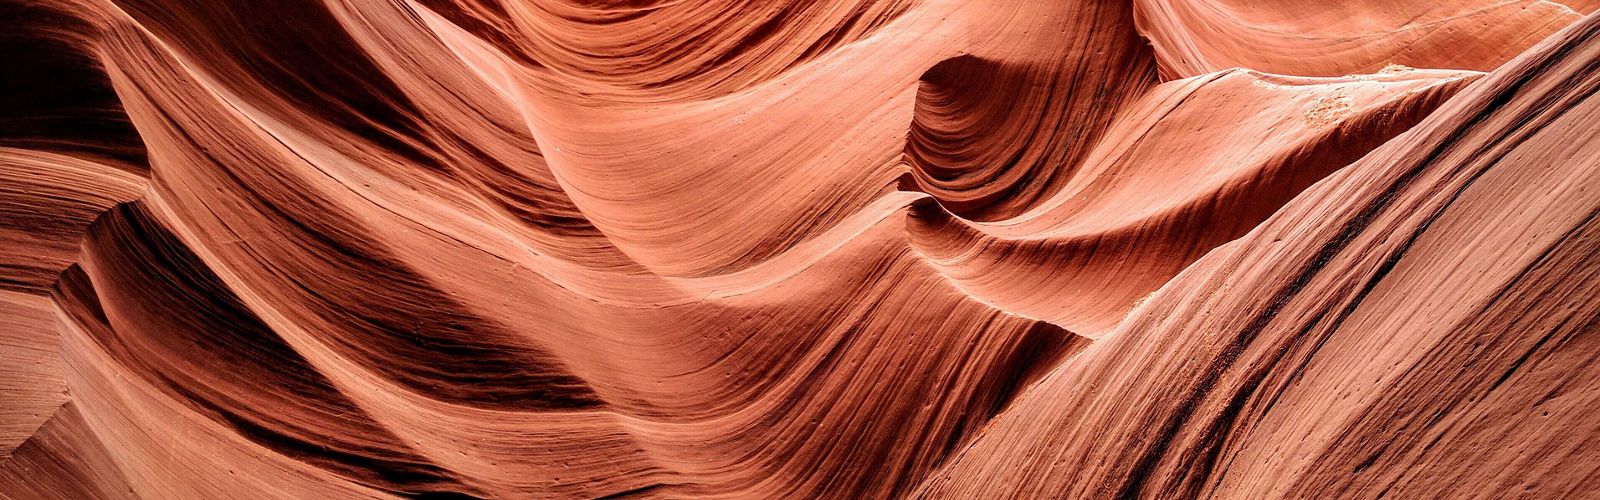 Abstract view of the red flowing rocks of a slot canyon